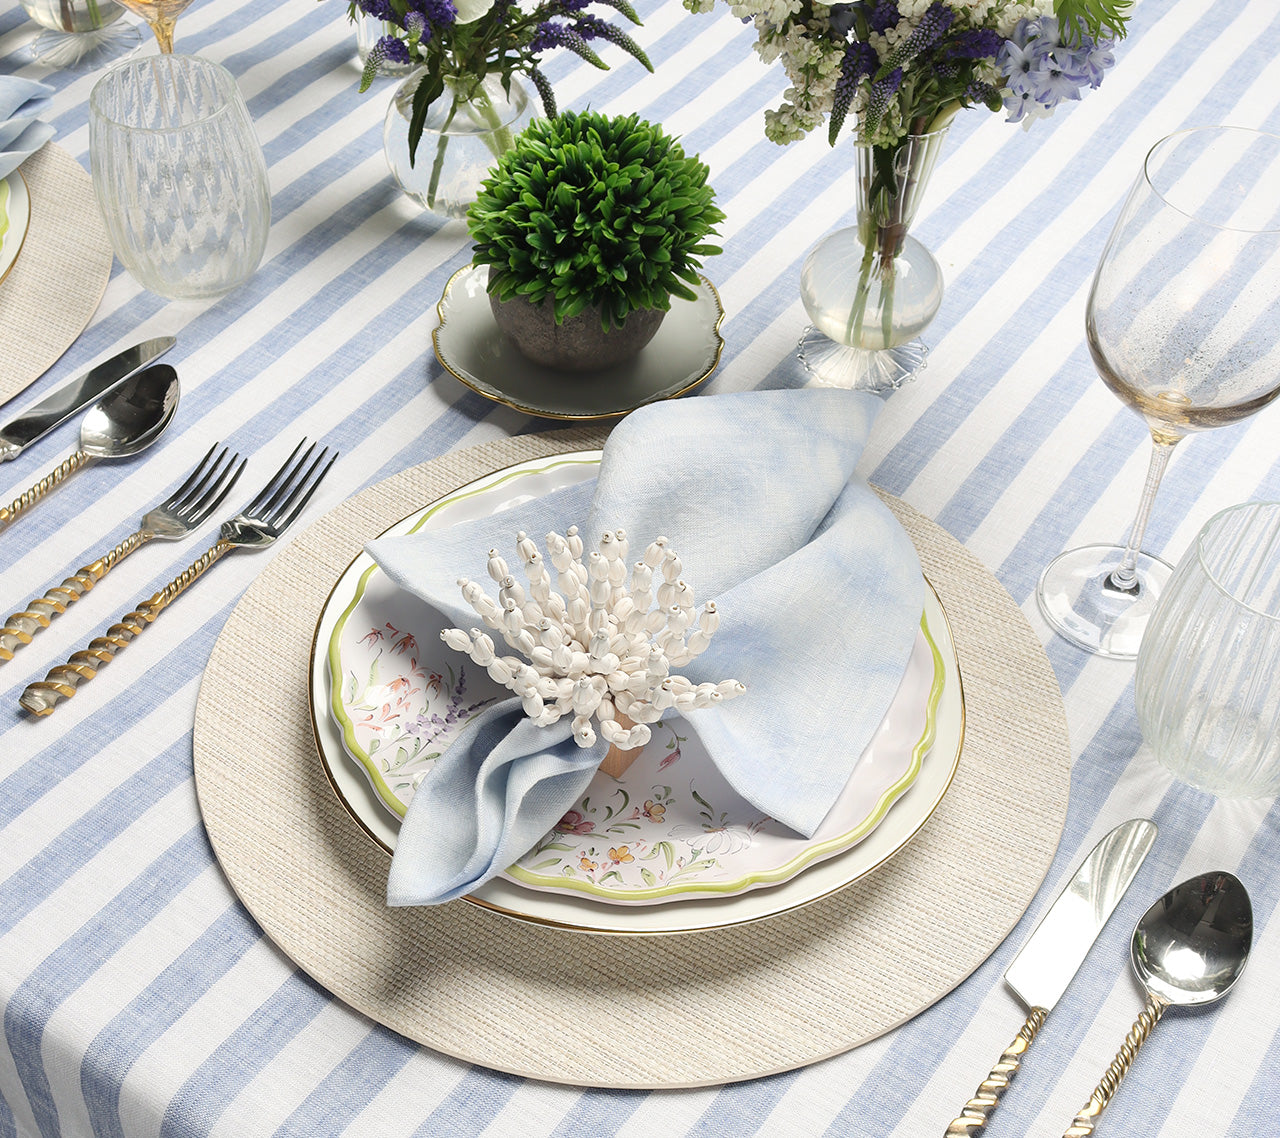 White & blue striped tablecloth,  gold cutlery, Seaside Placemat in natural, white floral plate, blue napkin and flowers in clear vases